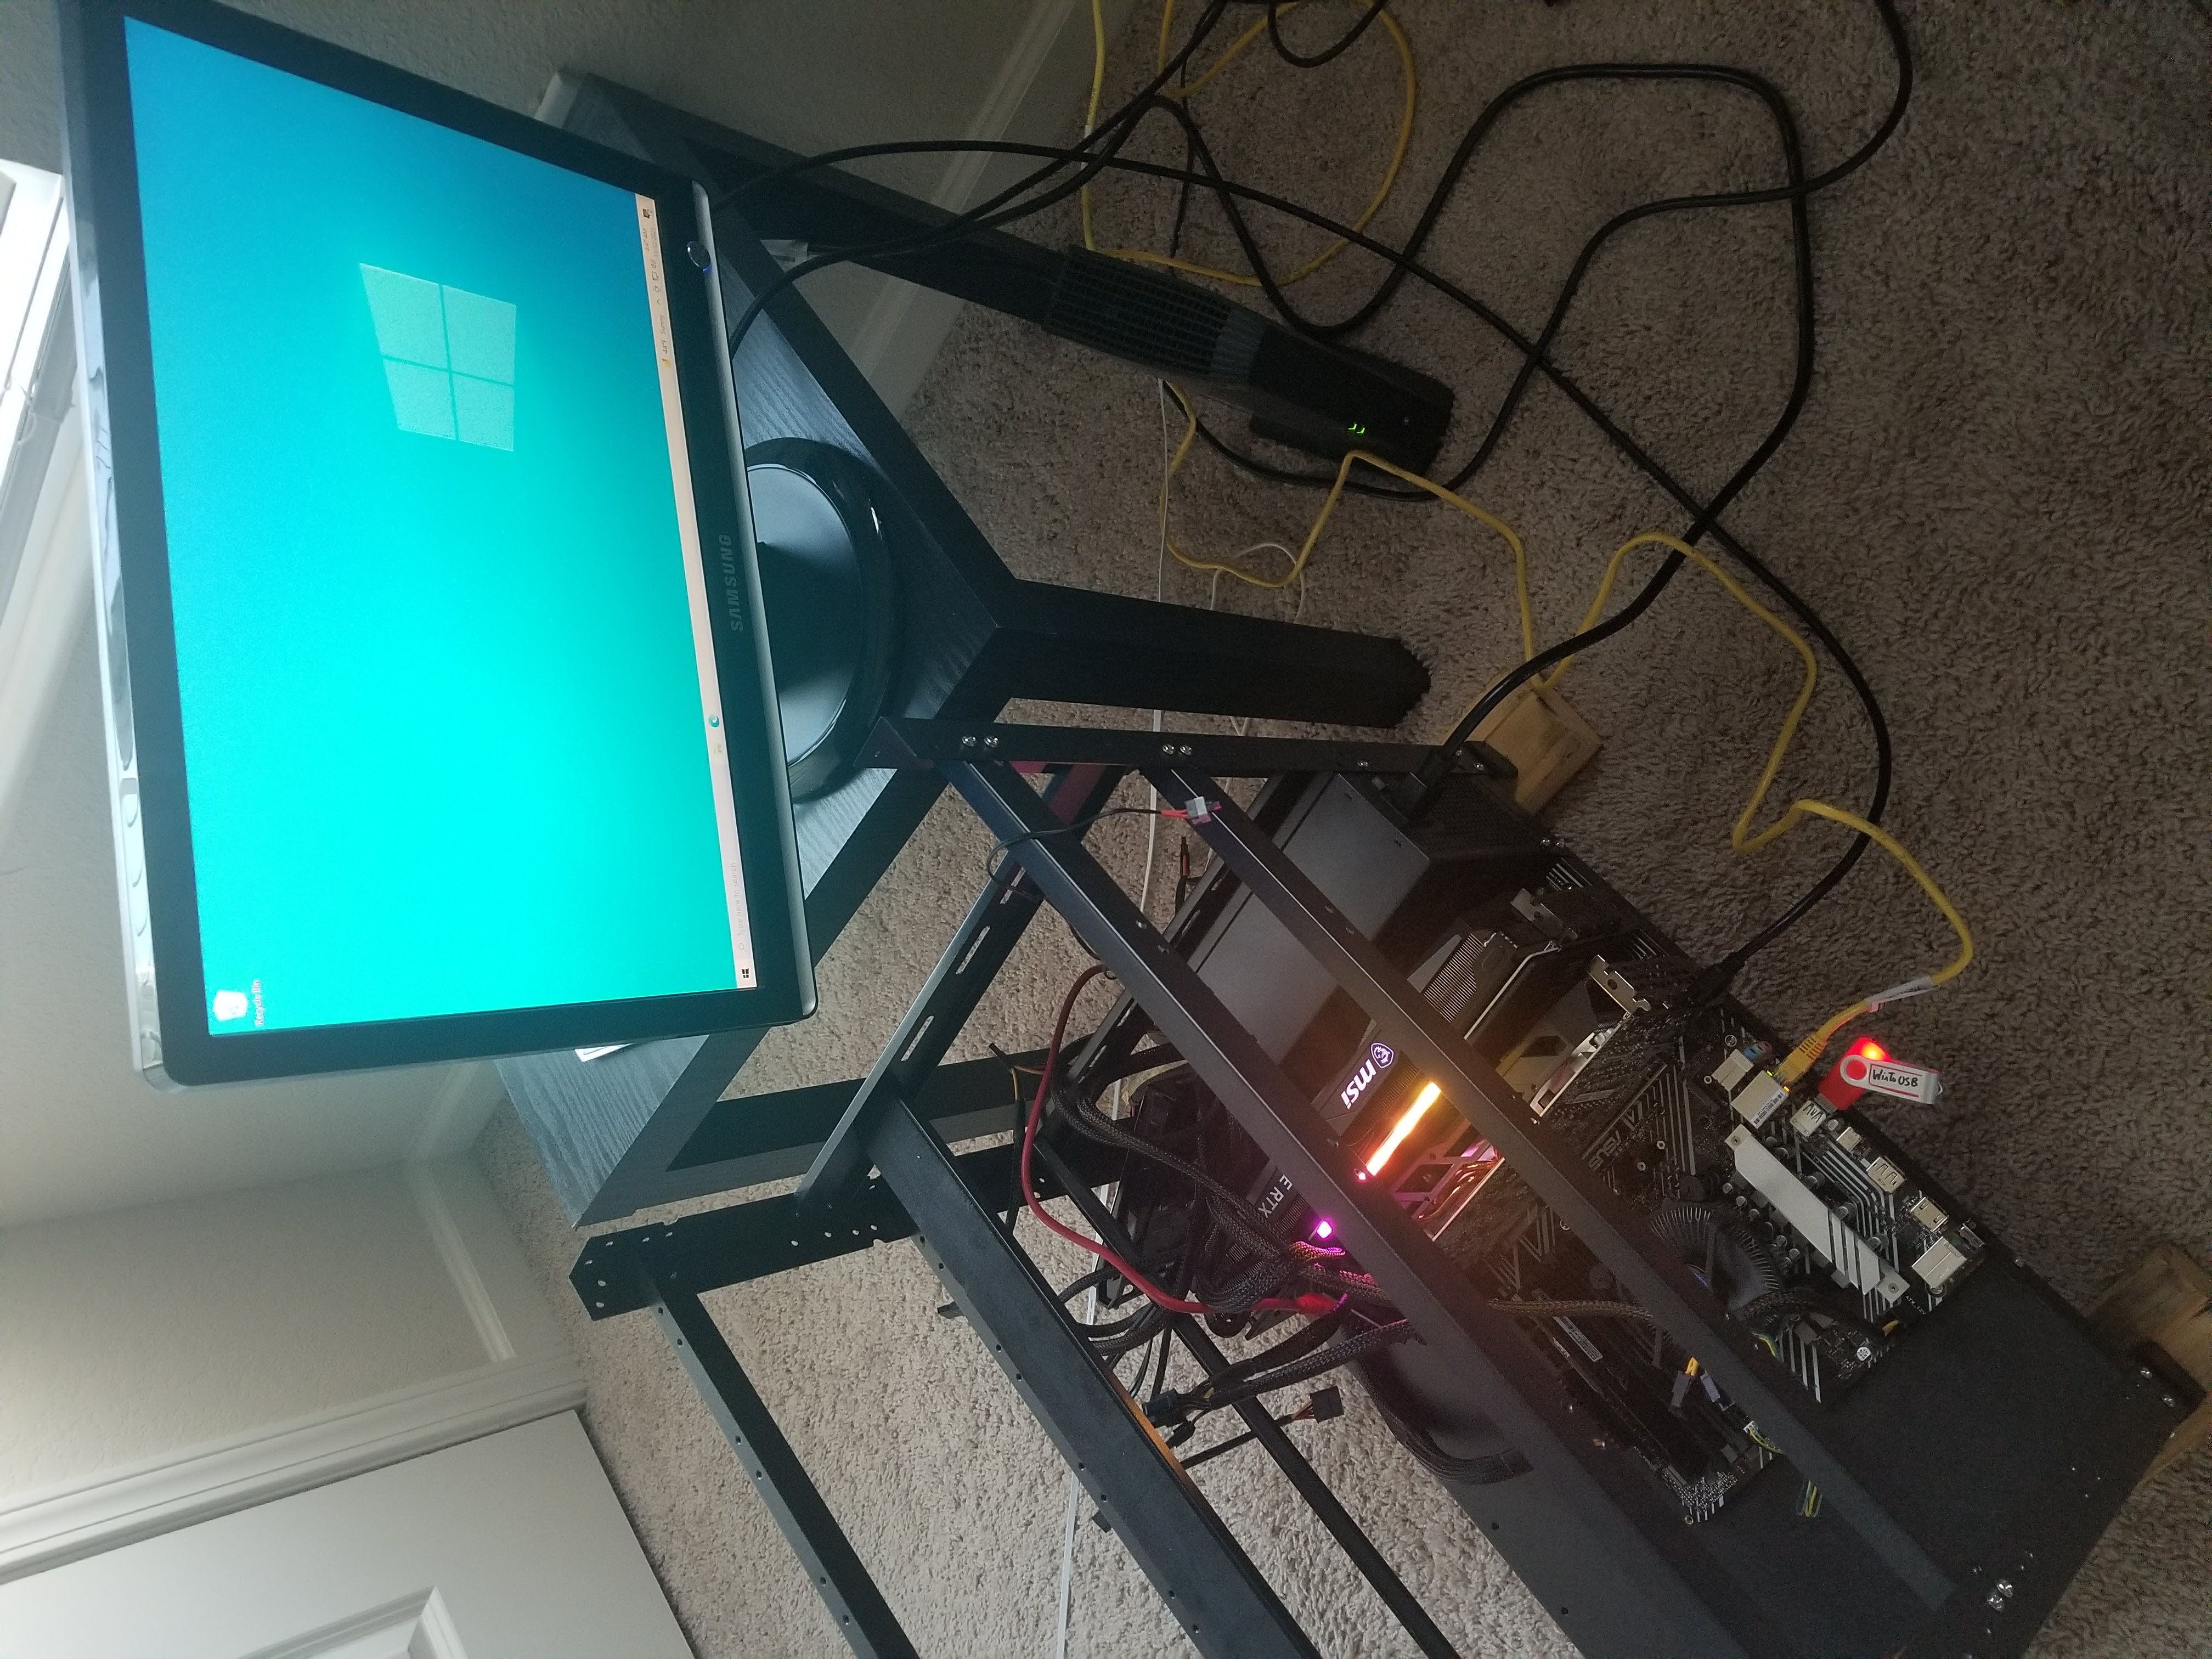 This is my starter mining rig